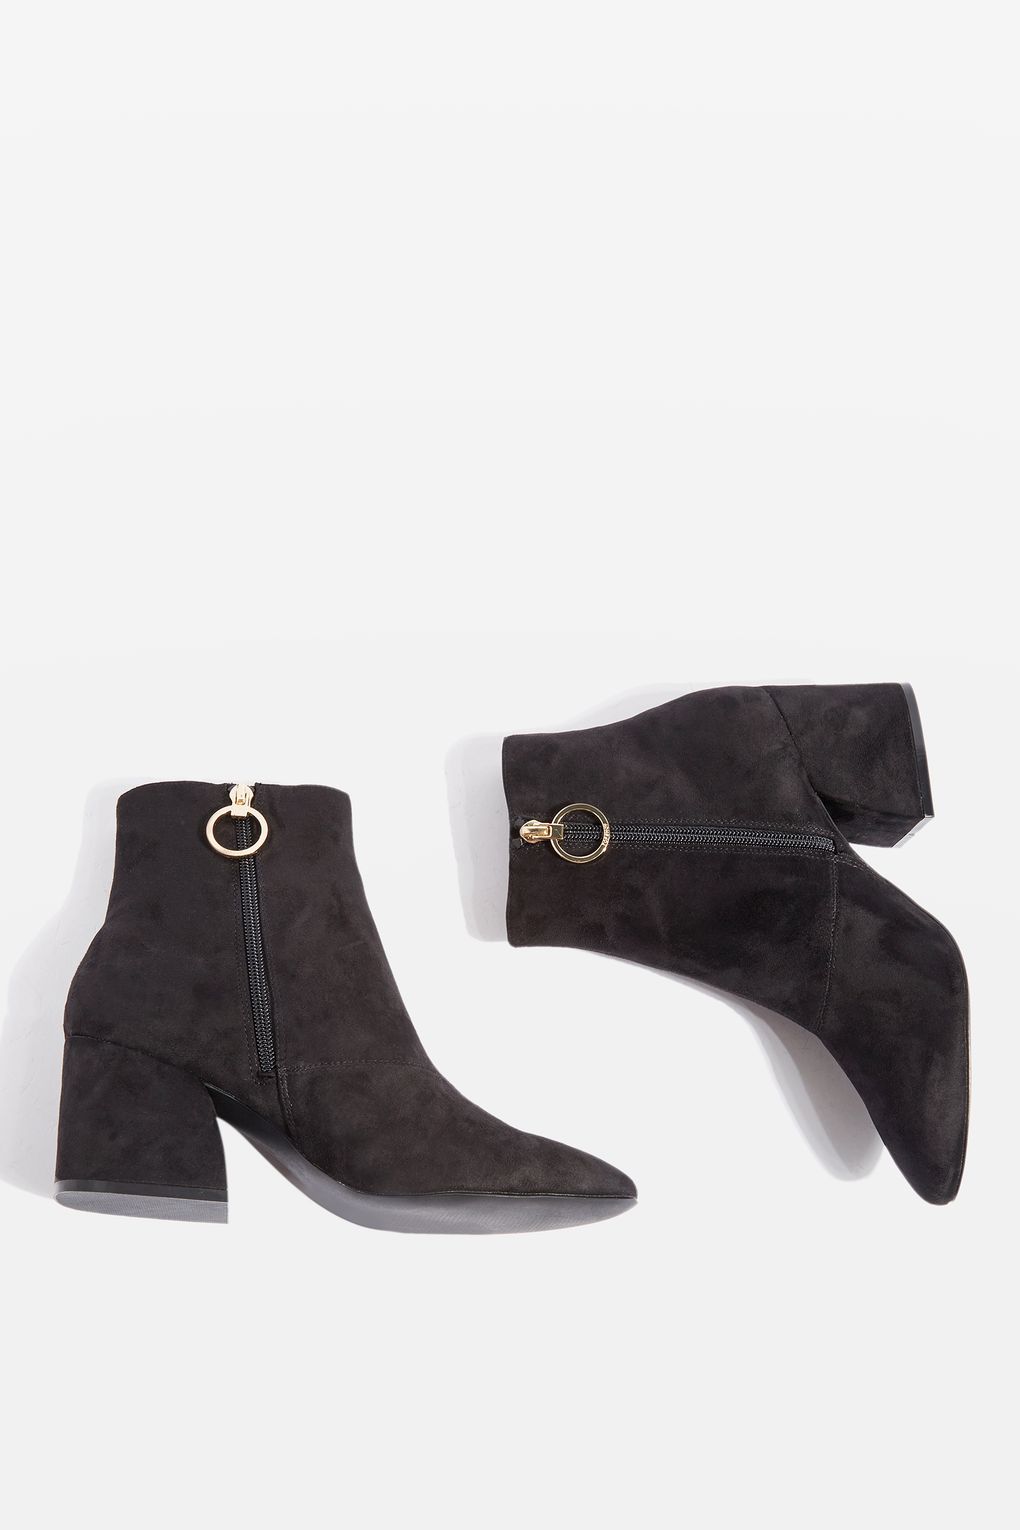 topshop black leather ankle boots